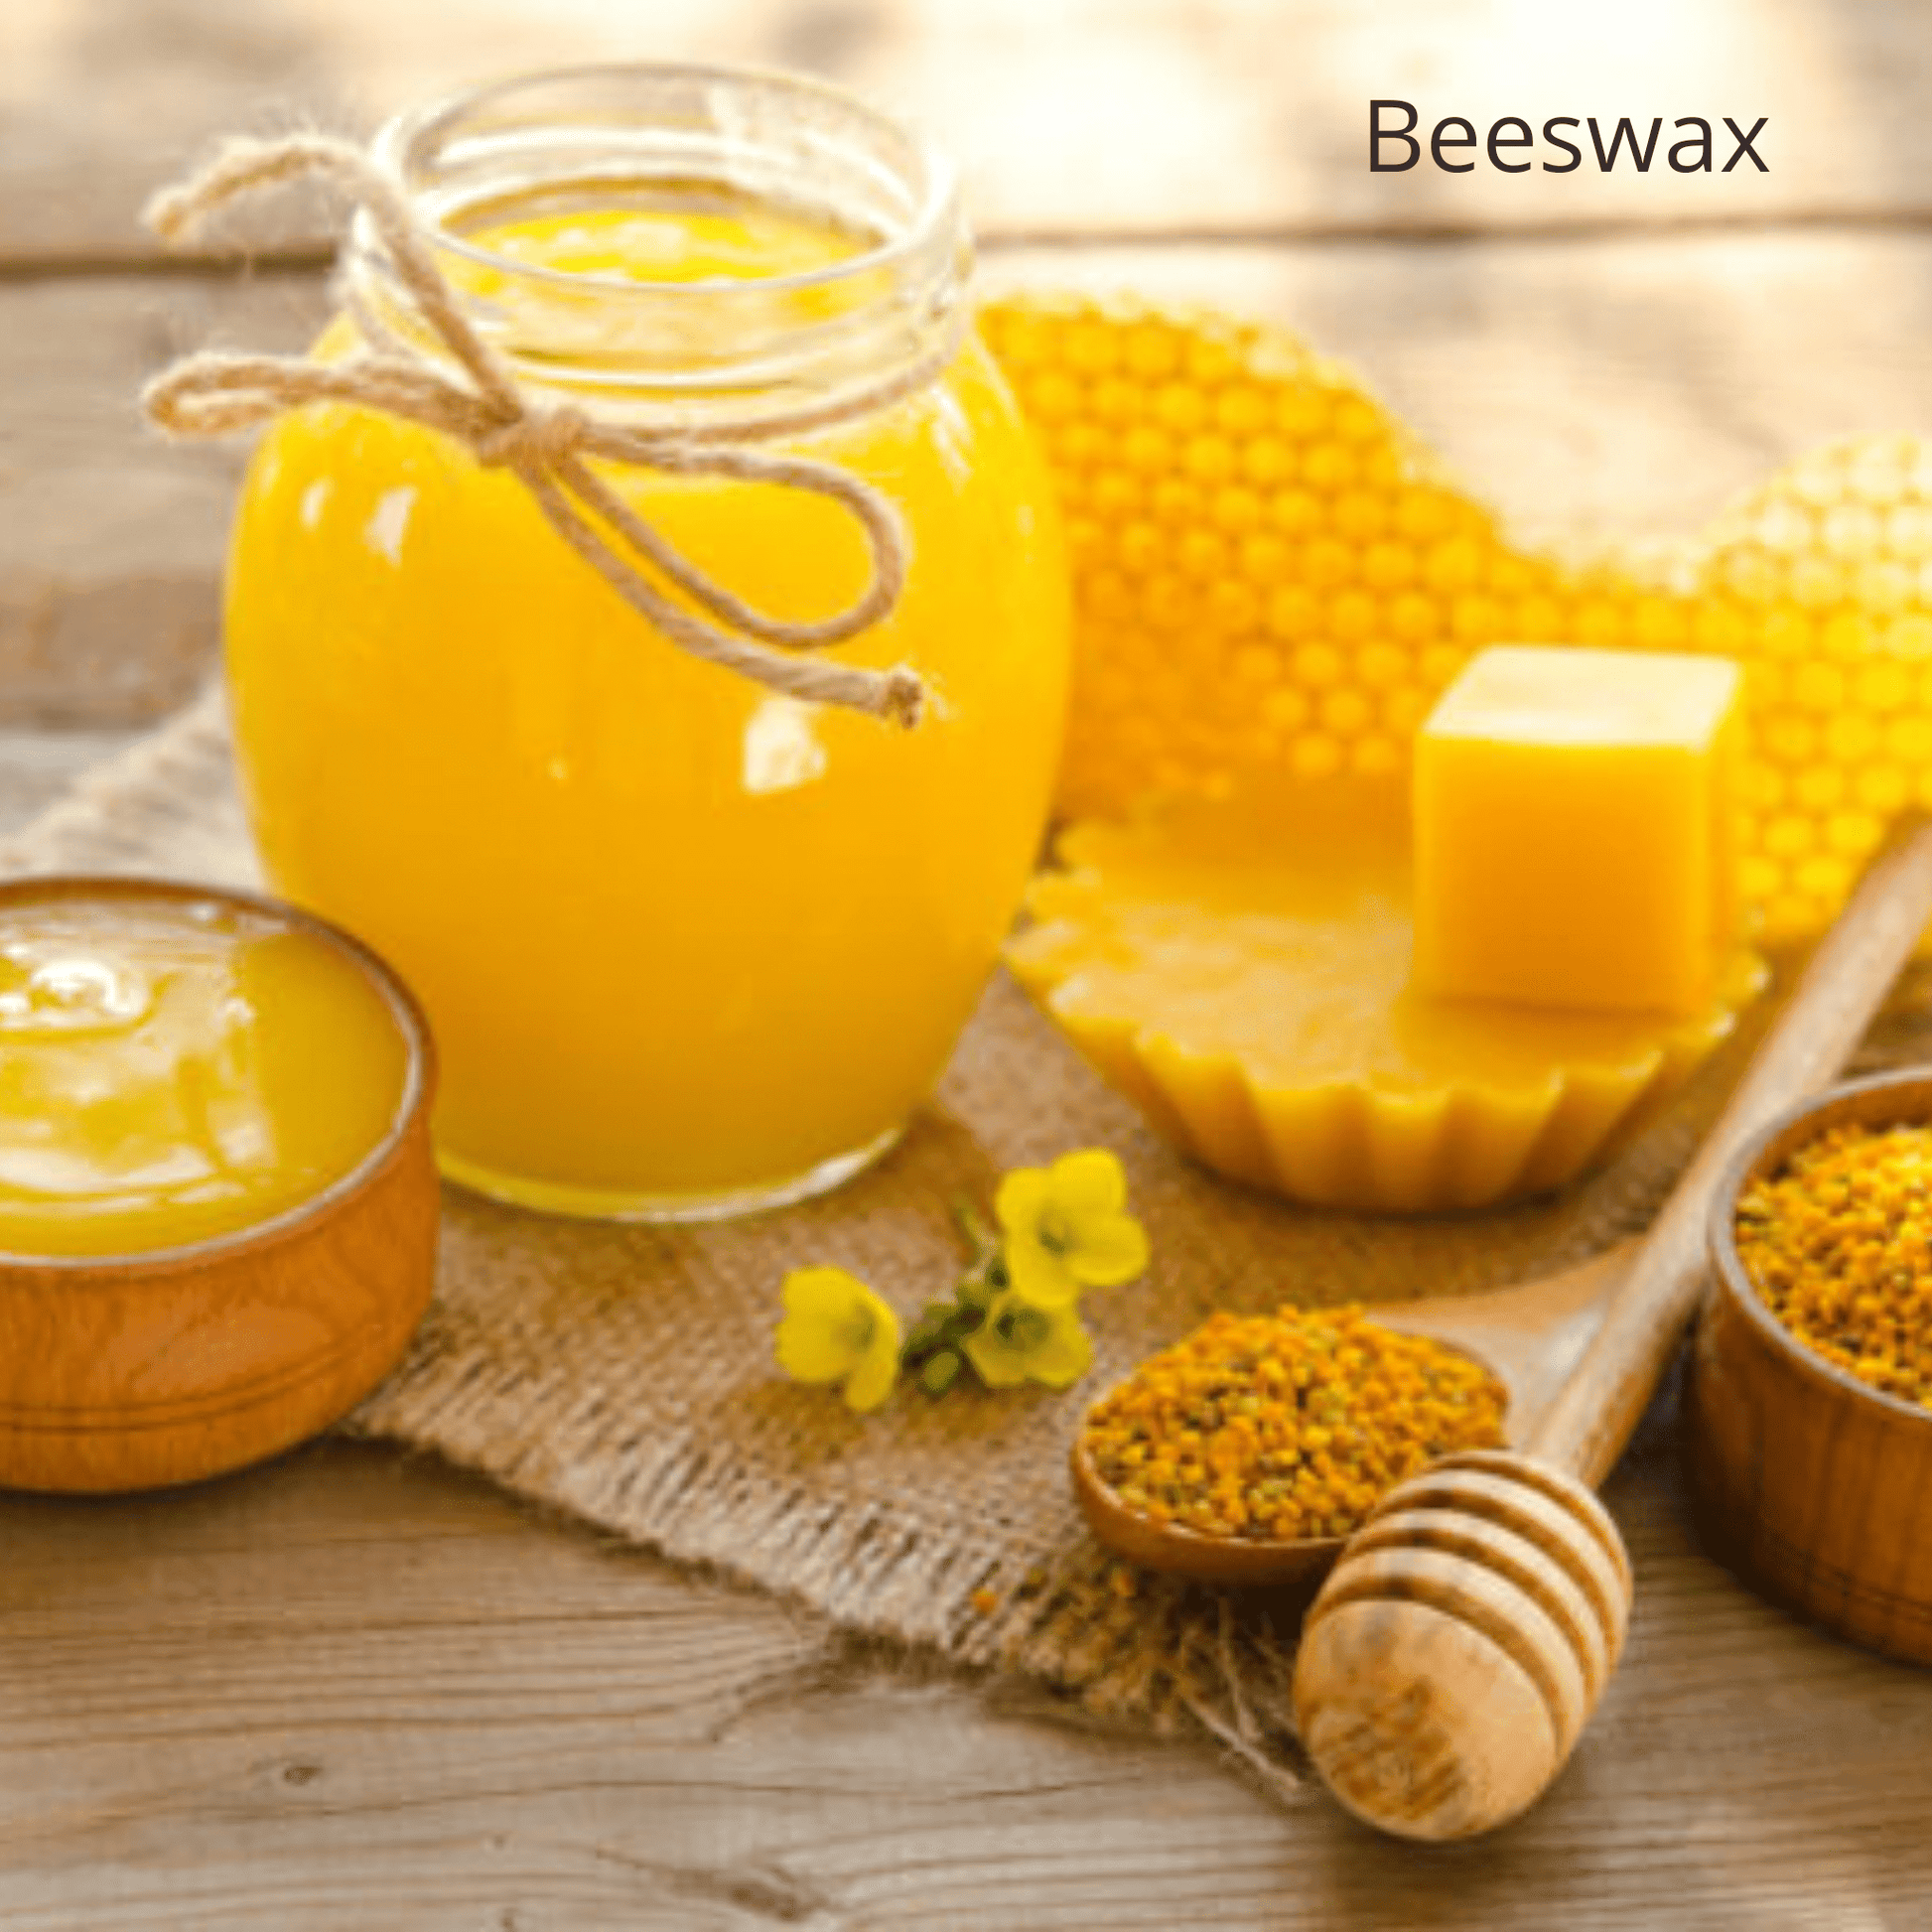 Be Green Bath and Body Lip Balm contains beeswax